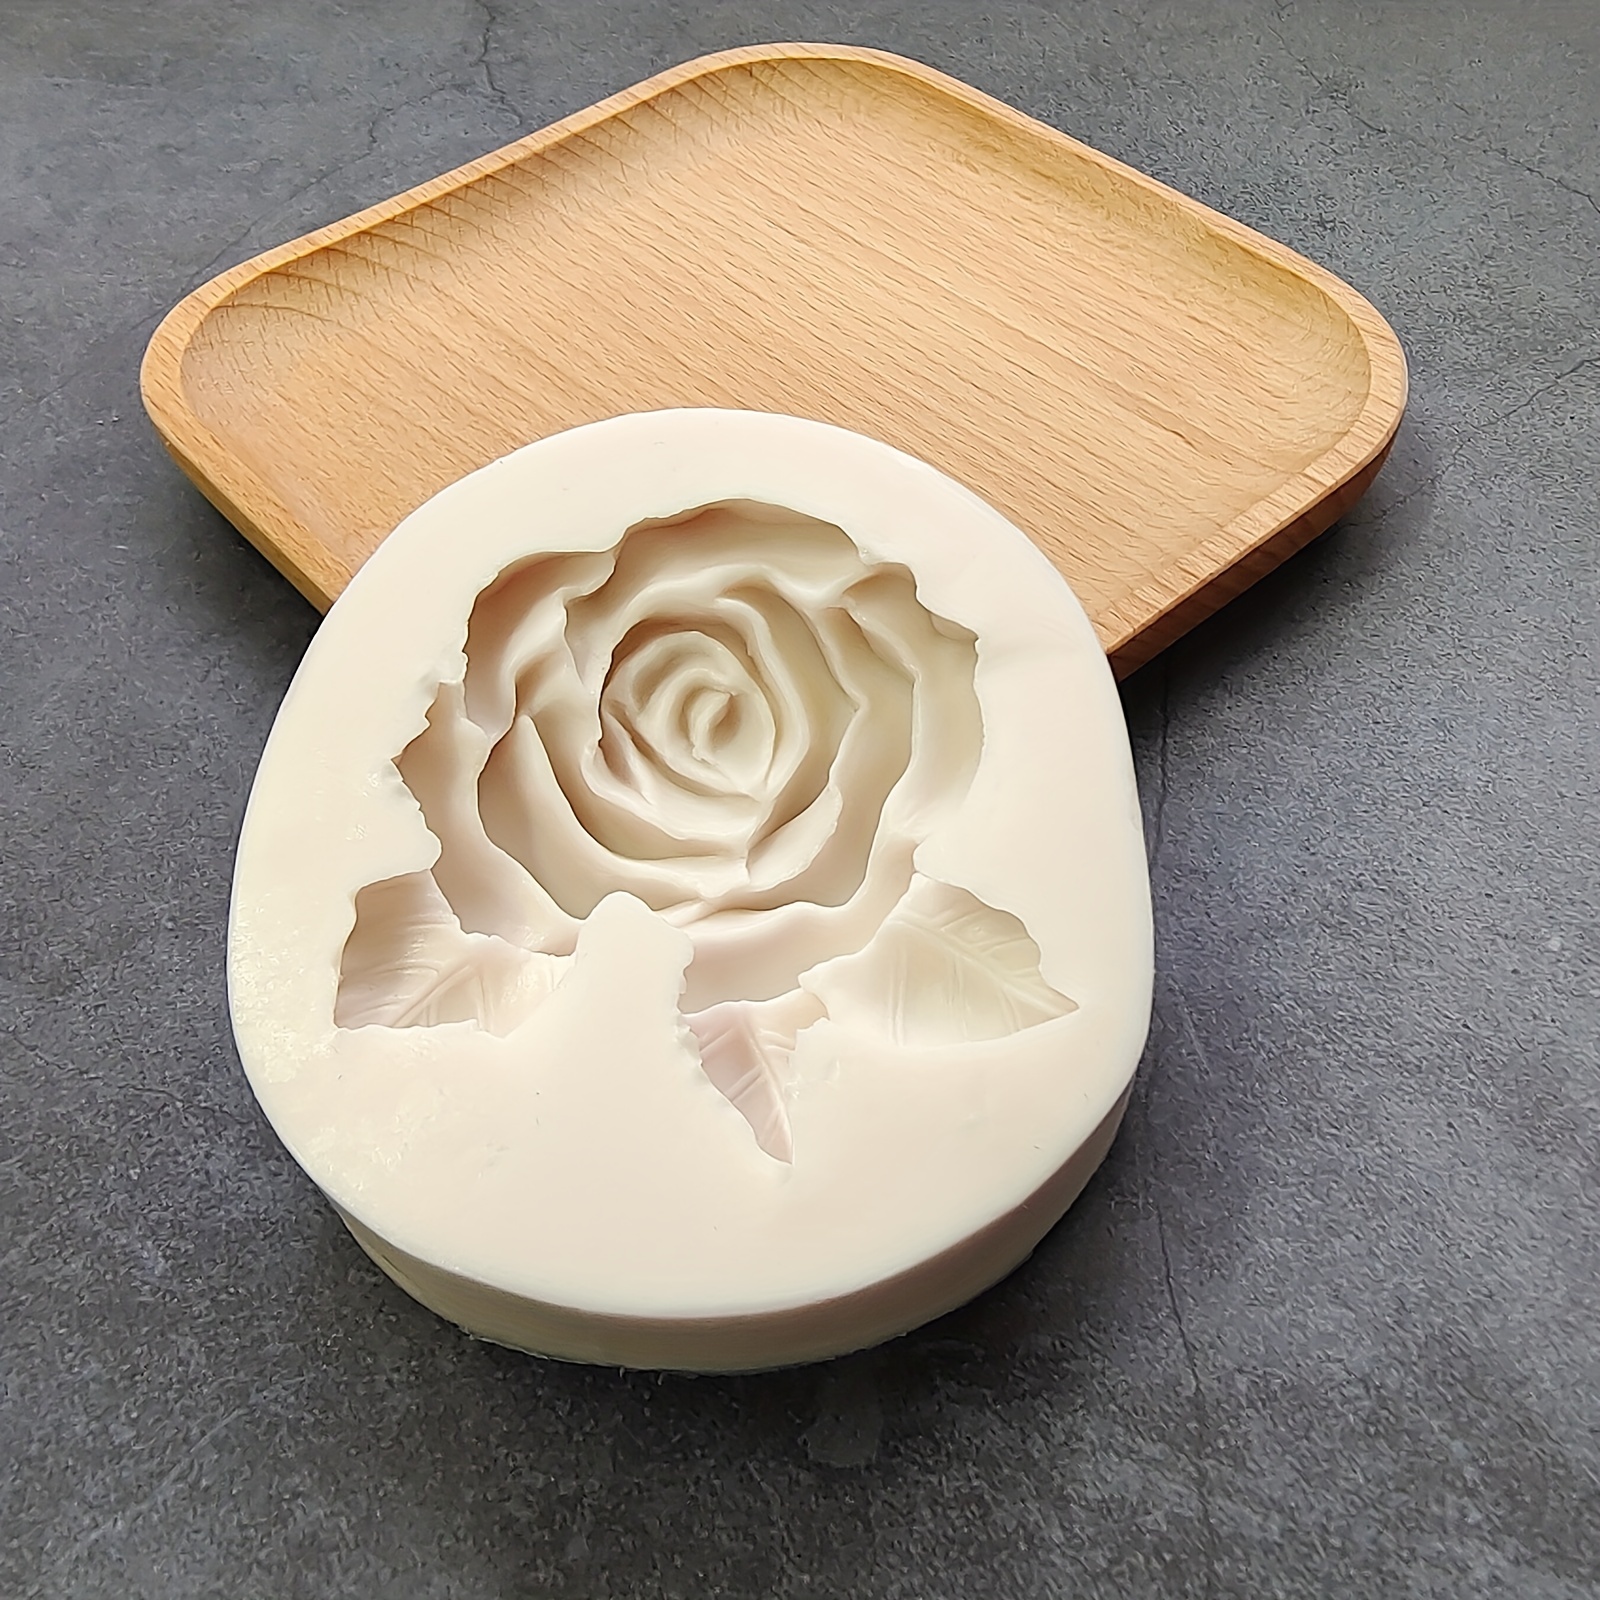 1pc Silicone Rose Flower Mold